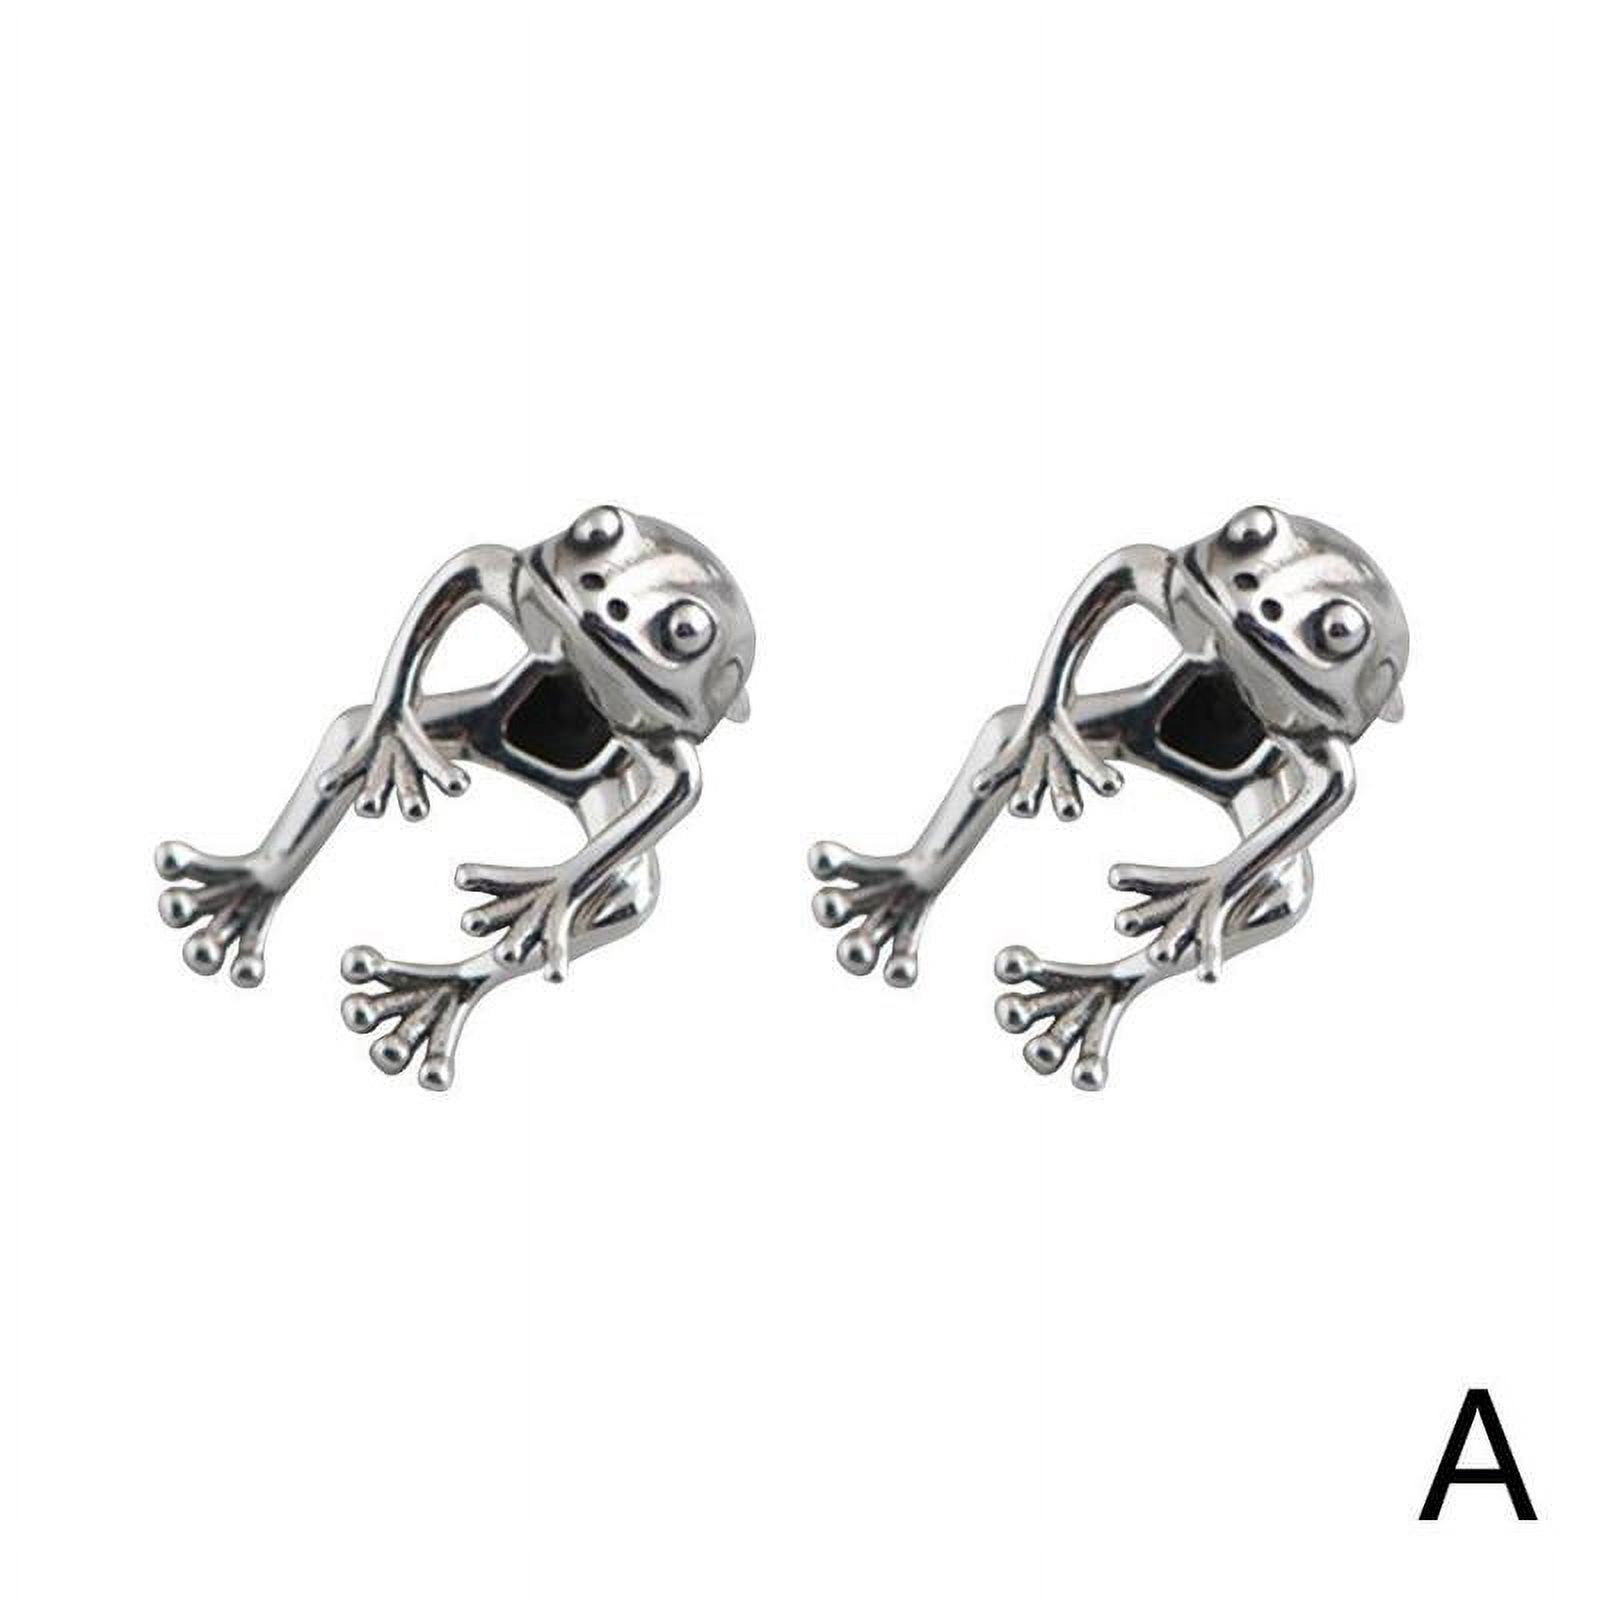 Vintage Gothic Frog Earrings Stud Earring Punk Jewelry Gifts For Women Girl Party Accessories A4E3 - image 1 of 9